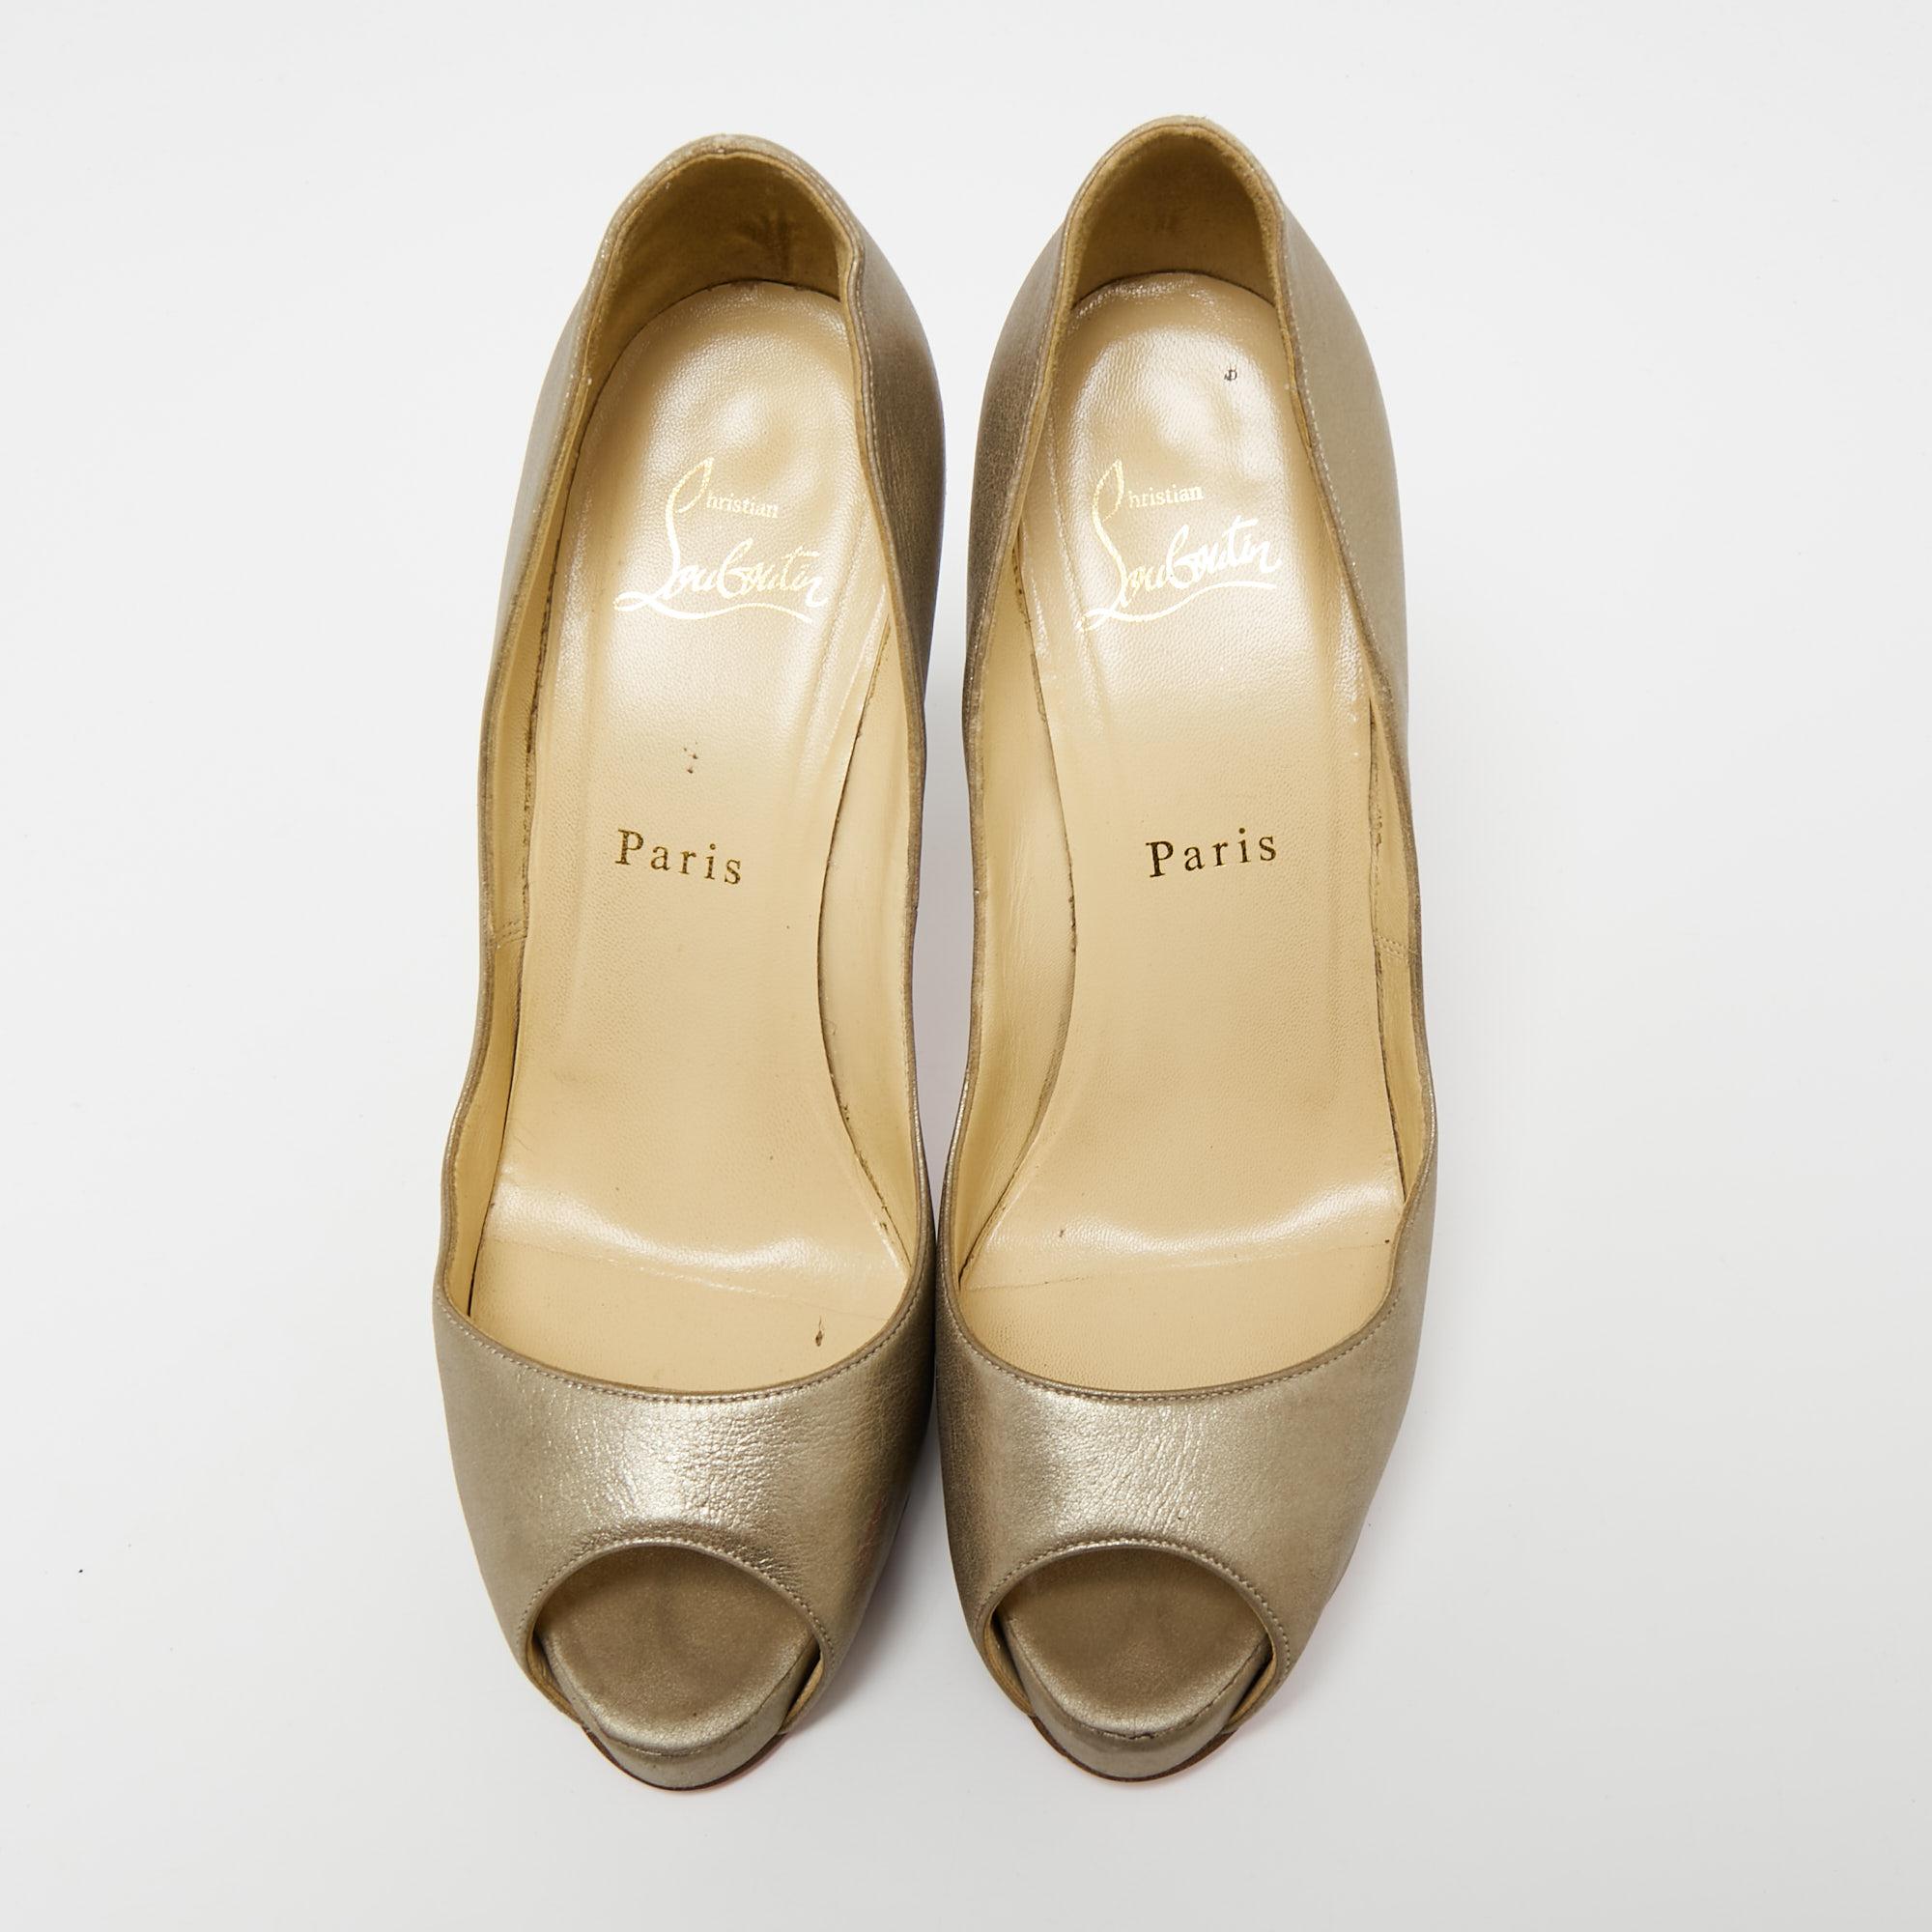 Christian Louboutin Metallic Beige Leather Very Prive Peep-Toe Pumps Size 37.5 For Sale 2